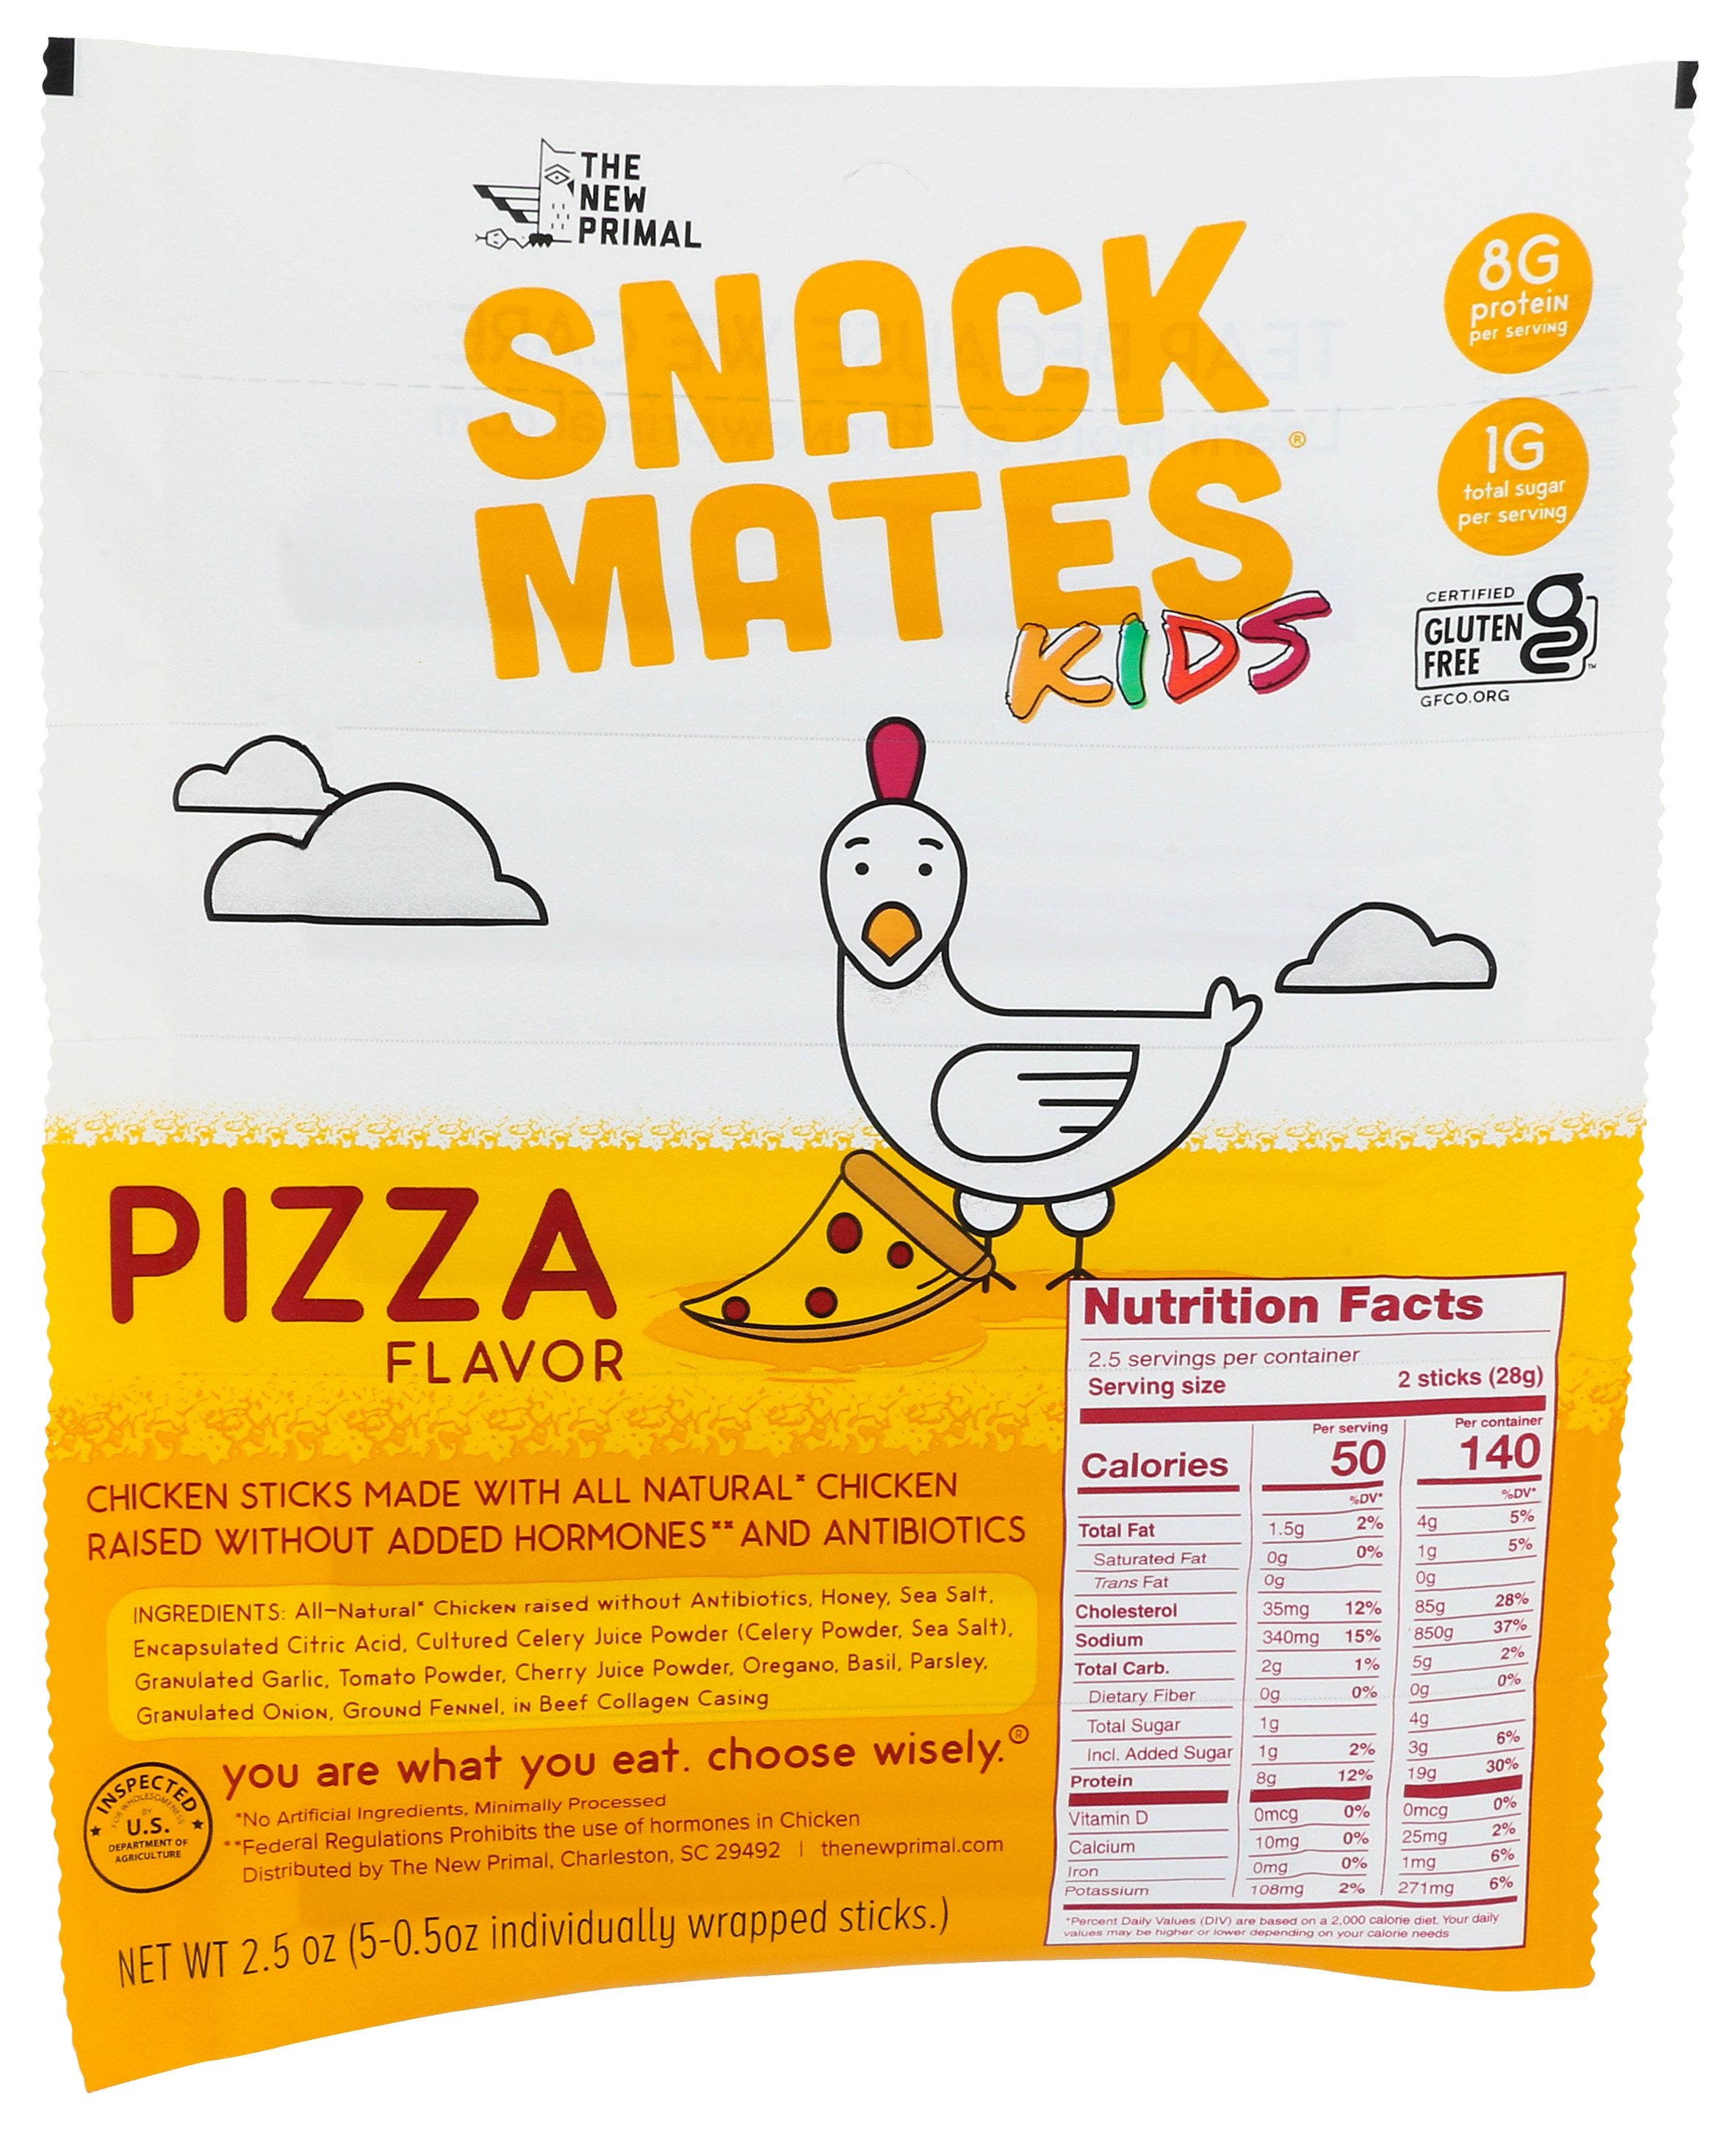 THE NEW PRIMAL PIZZA CHICKEN SNACK MATE - Case of 8